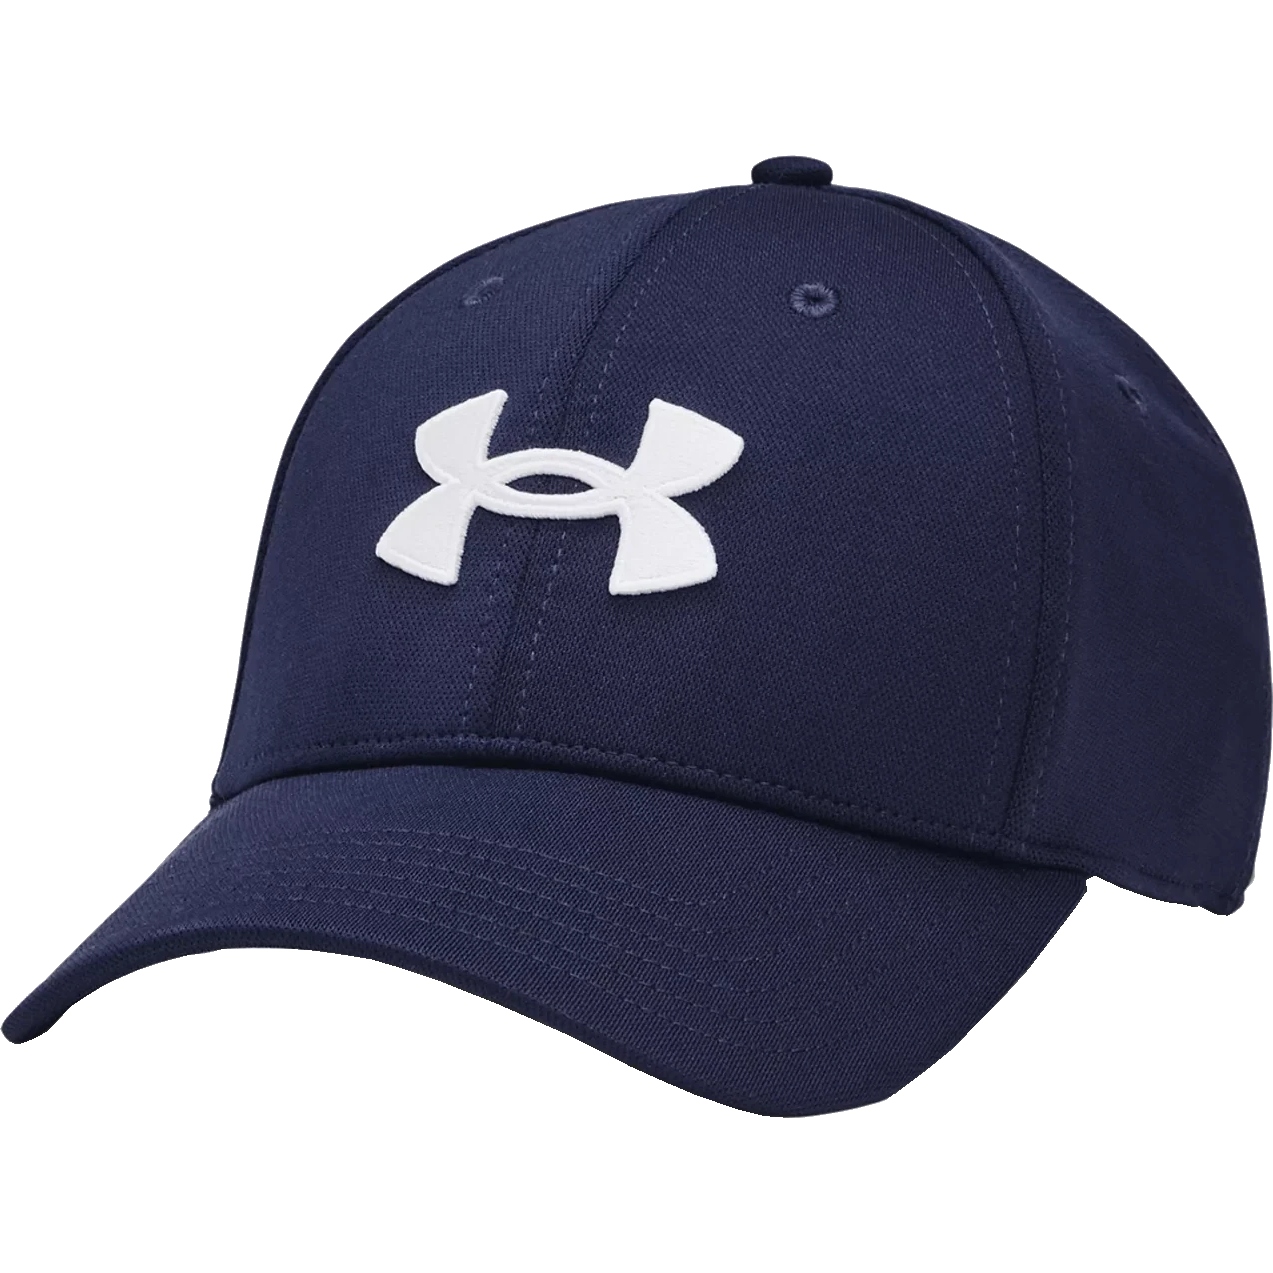 Under Armour Casquette Homme - UA Blitzing - Midnight Navy/White